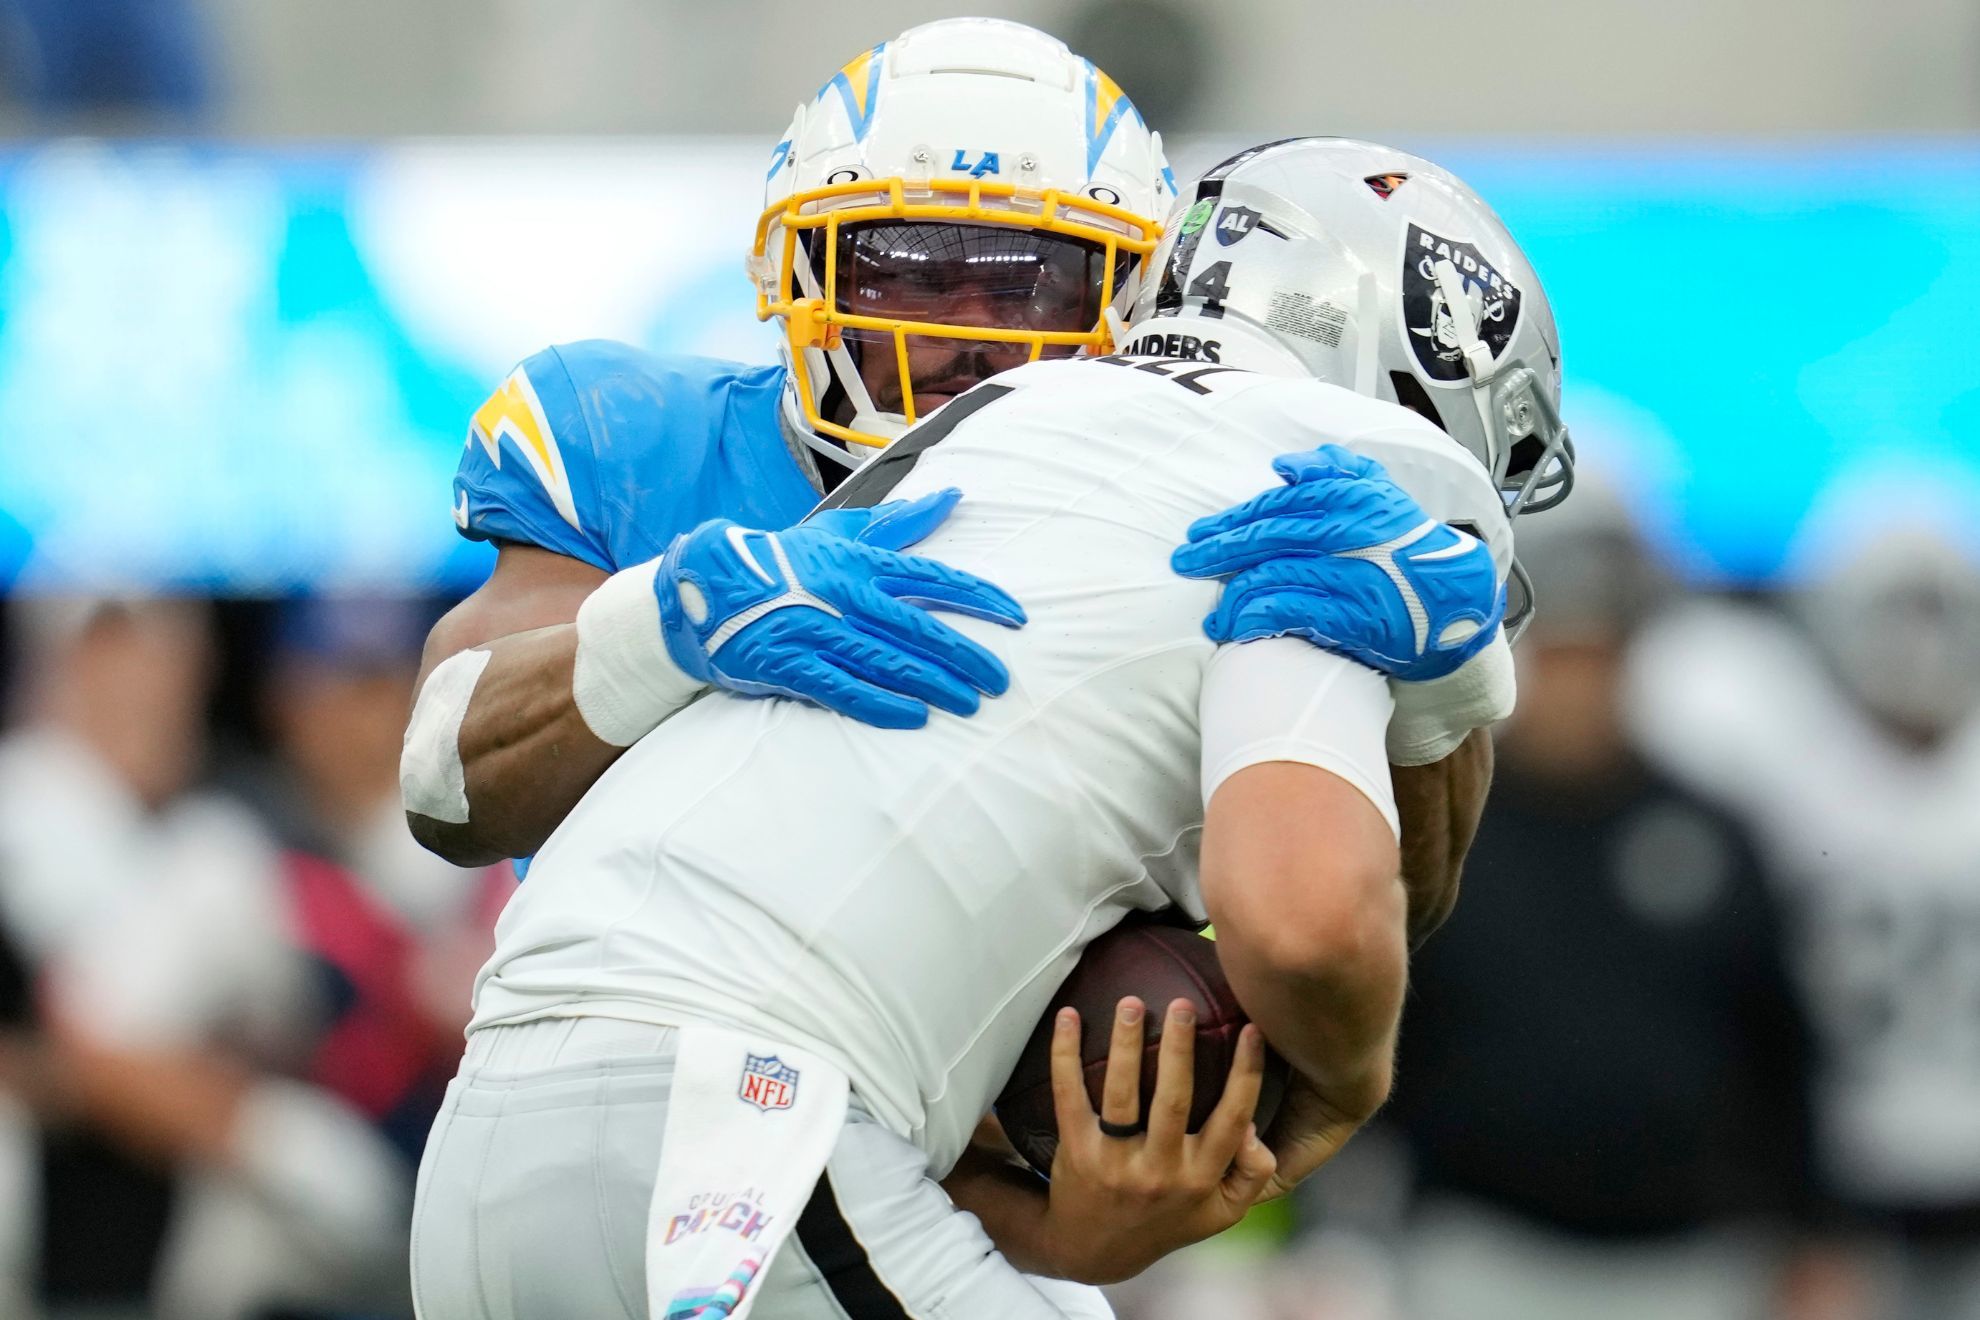 Chargers' Mack makes up for injured Herbert nearly blowing huge lead to Raiders